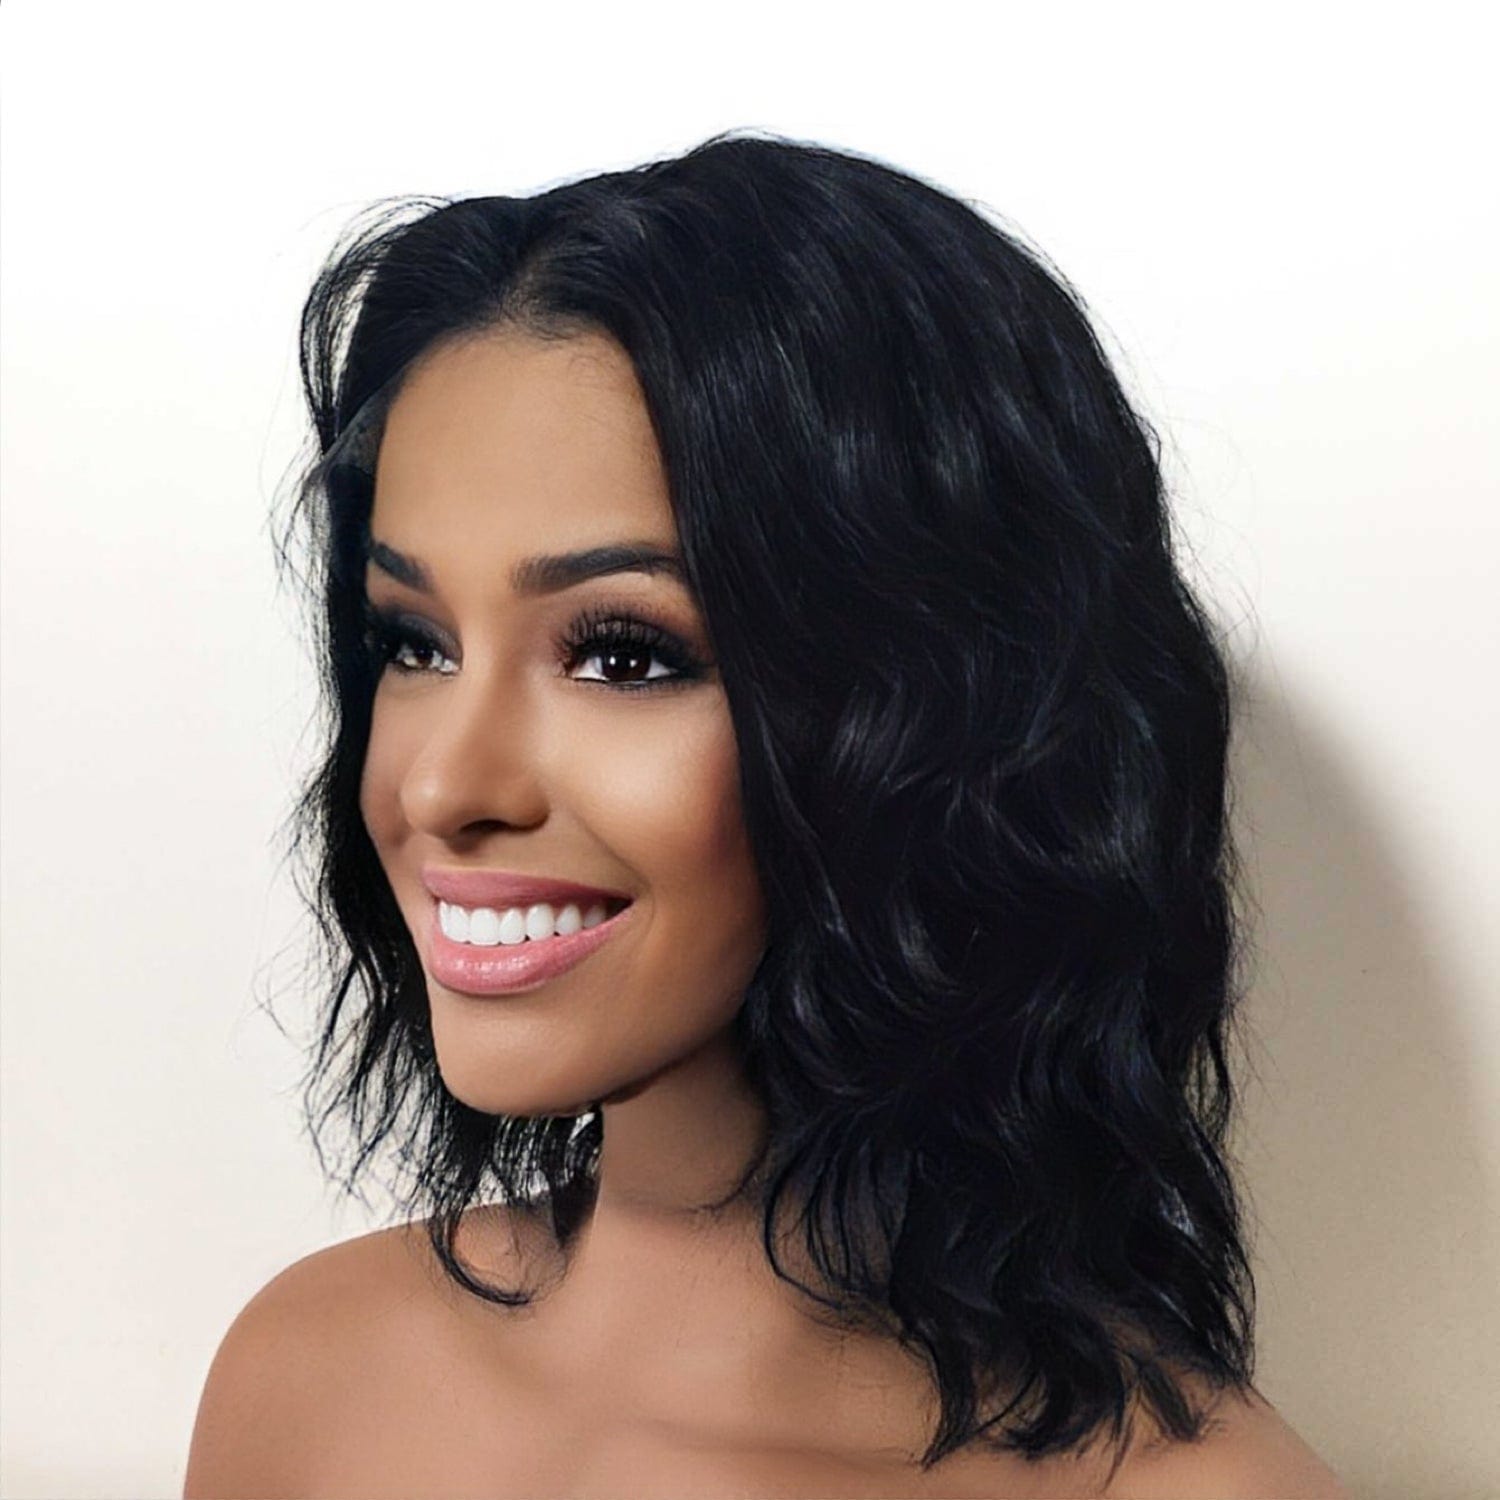 nevermindyrhead Women Black Human Hair Lace Front Short Curly Middle Part Choppy Wig